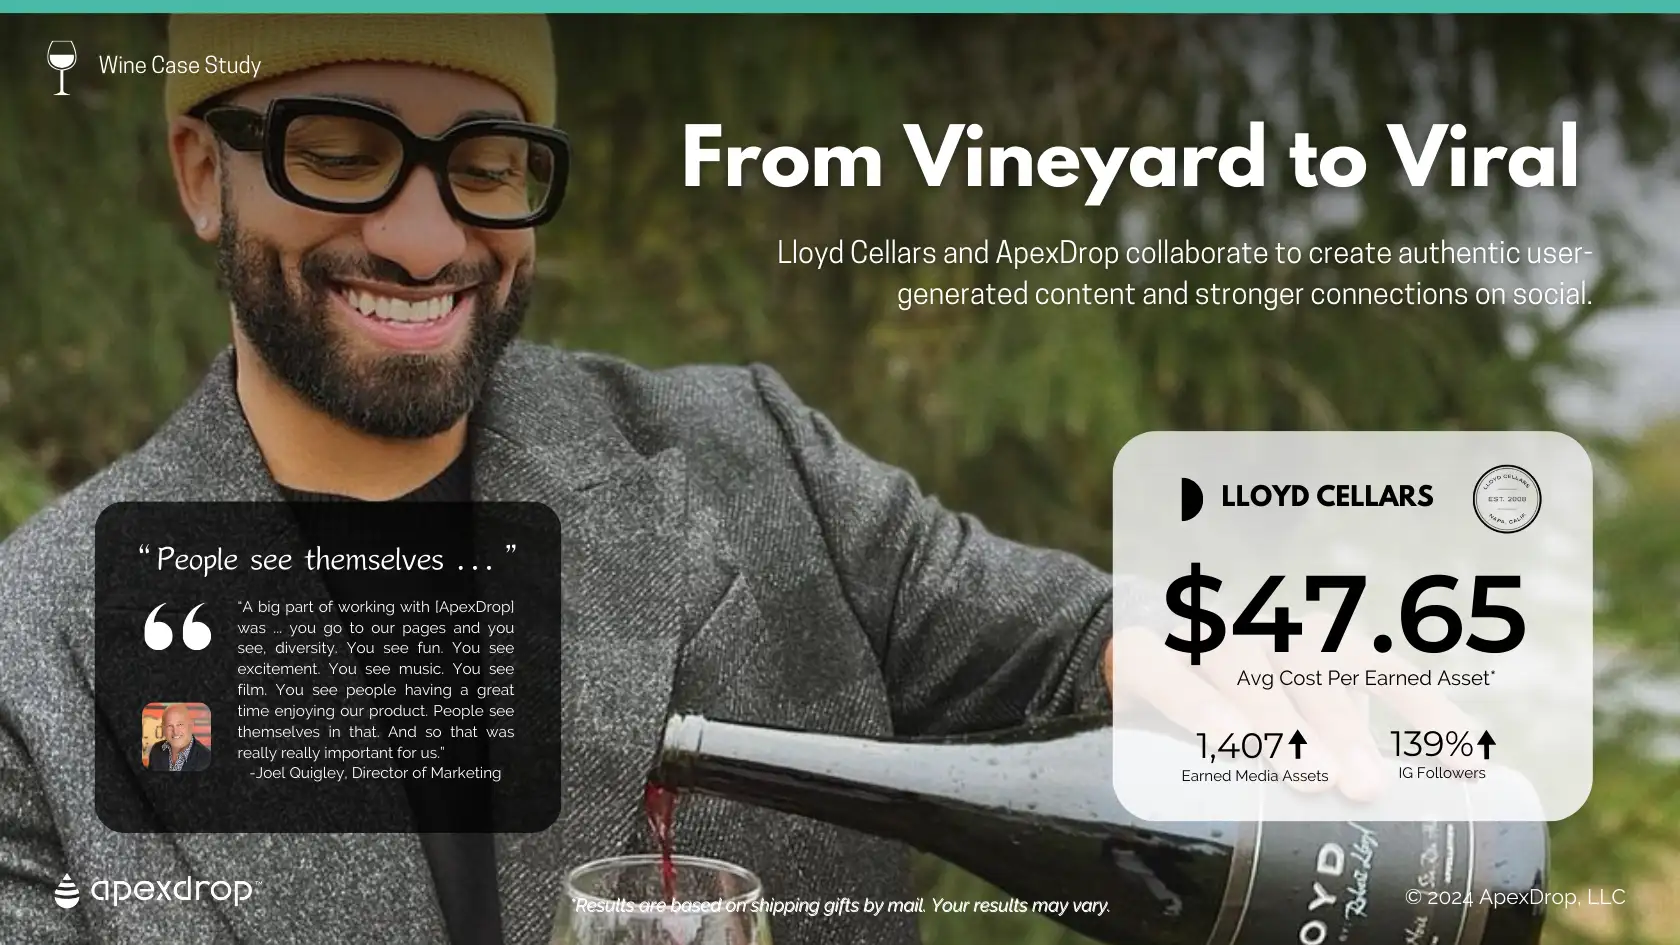 From Vineyard to Viral - Lloyd Cellars and ApexDrop collaborate to create authentic user-generated content and stronger connections on social.